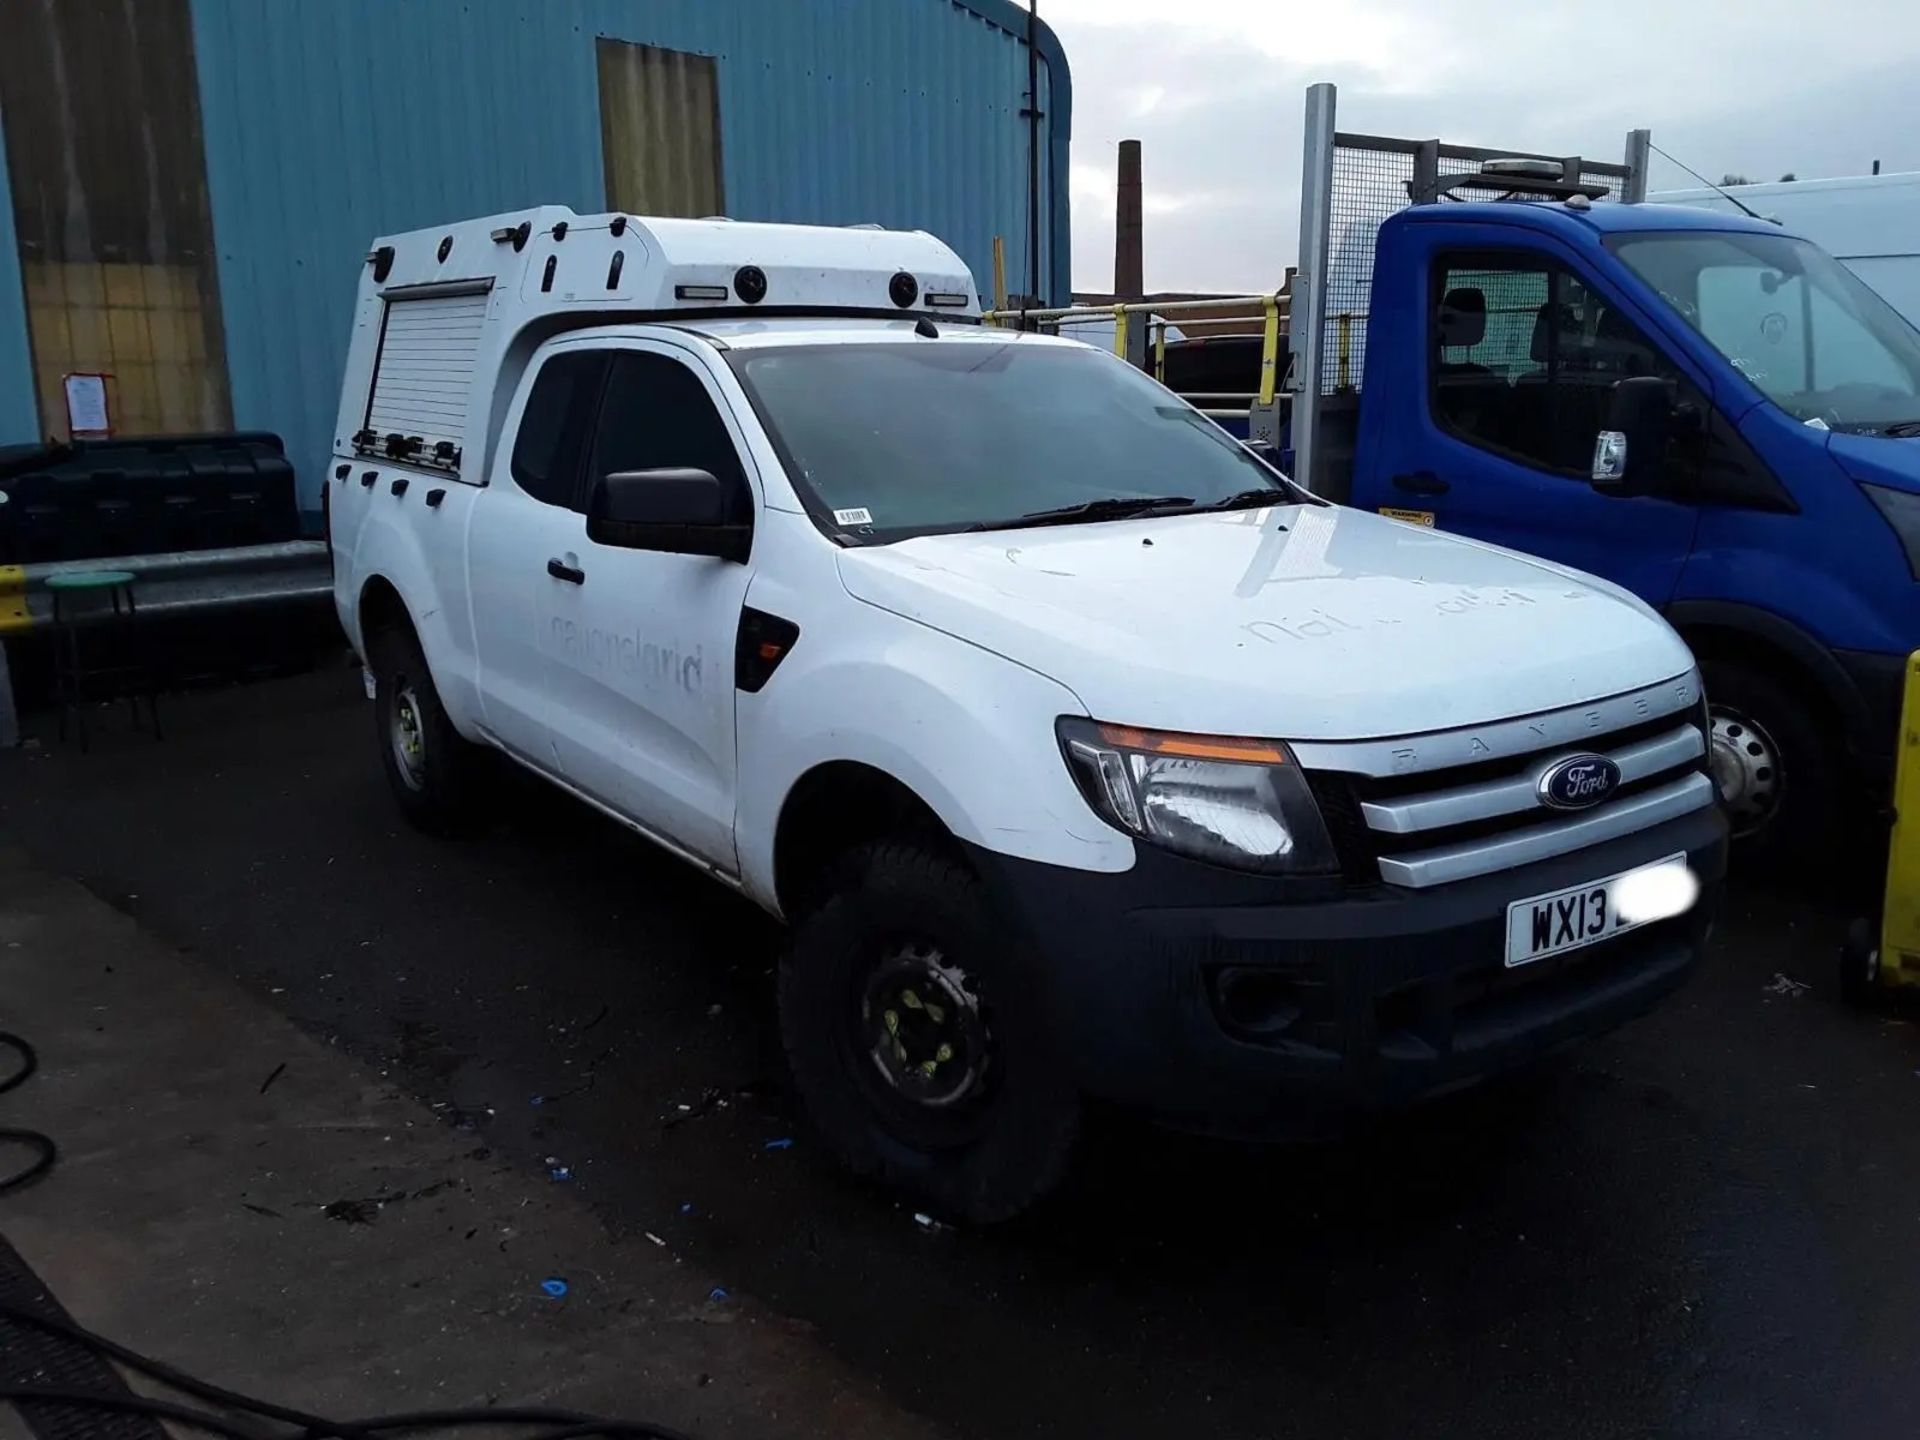 2013 FORD RANGER XL SUPER CAB - 4X4, IDEAL FOR RESTORATION OR PARTS (SPARES OR REPAIRS) - Image 7 of 8